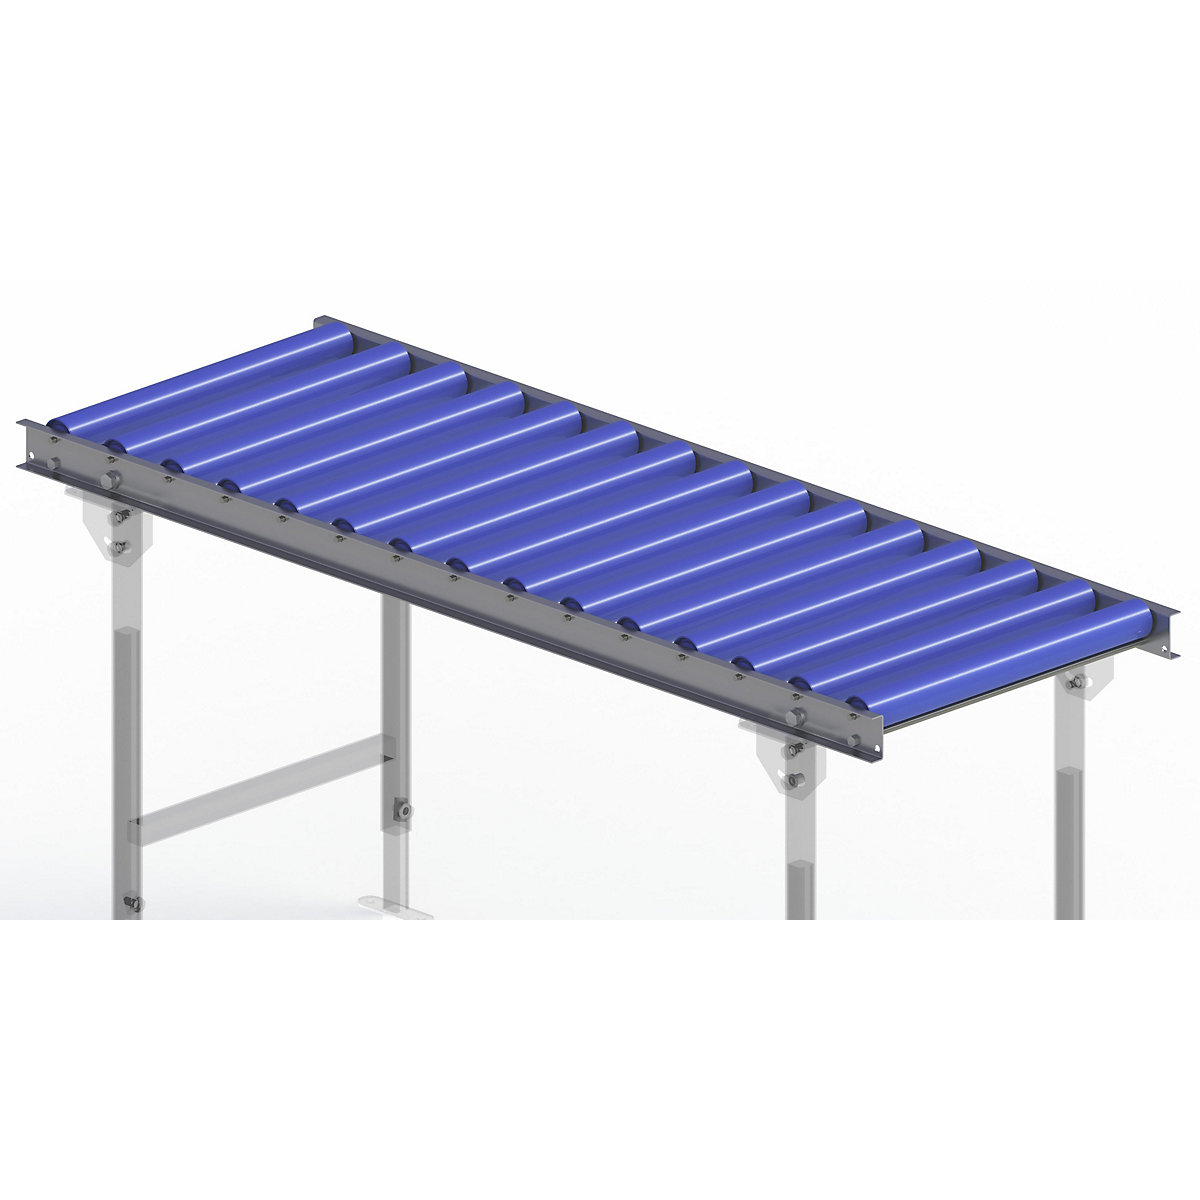 Gura – Light duty roller conveyor, steel frame with plastic rollers, track width 500 mm, axle spacing 100 mm, length 1.5 m